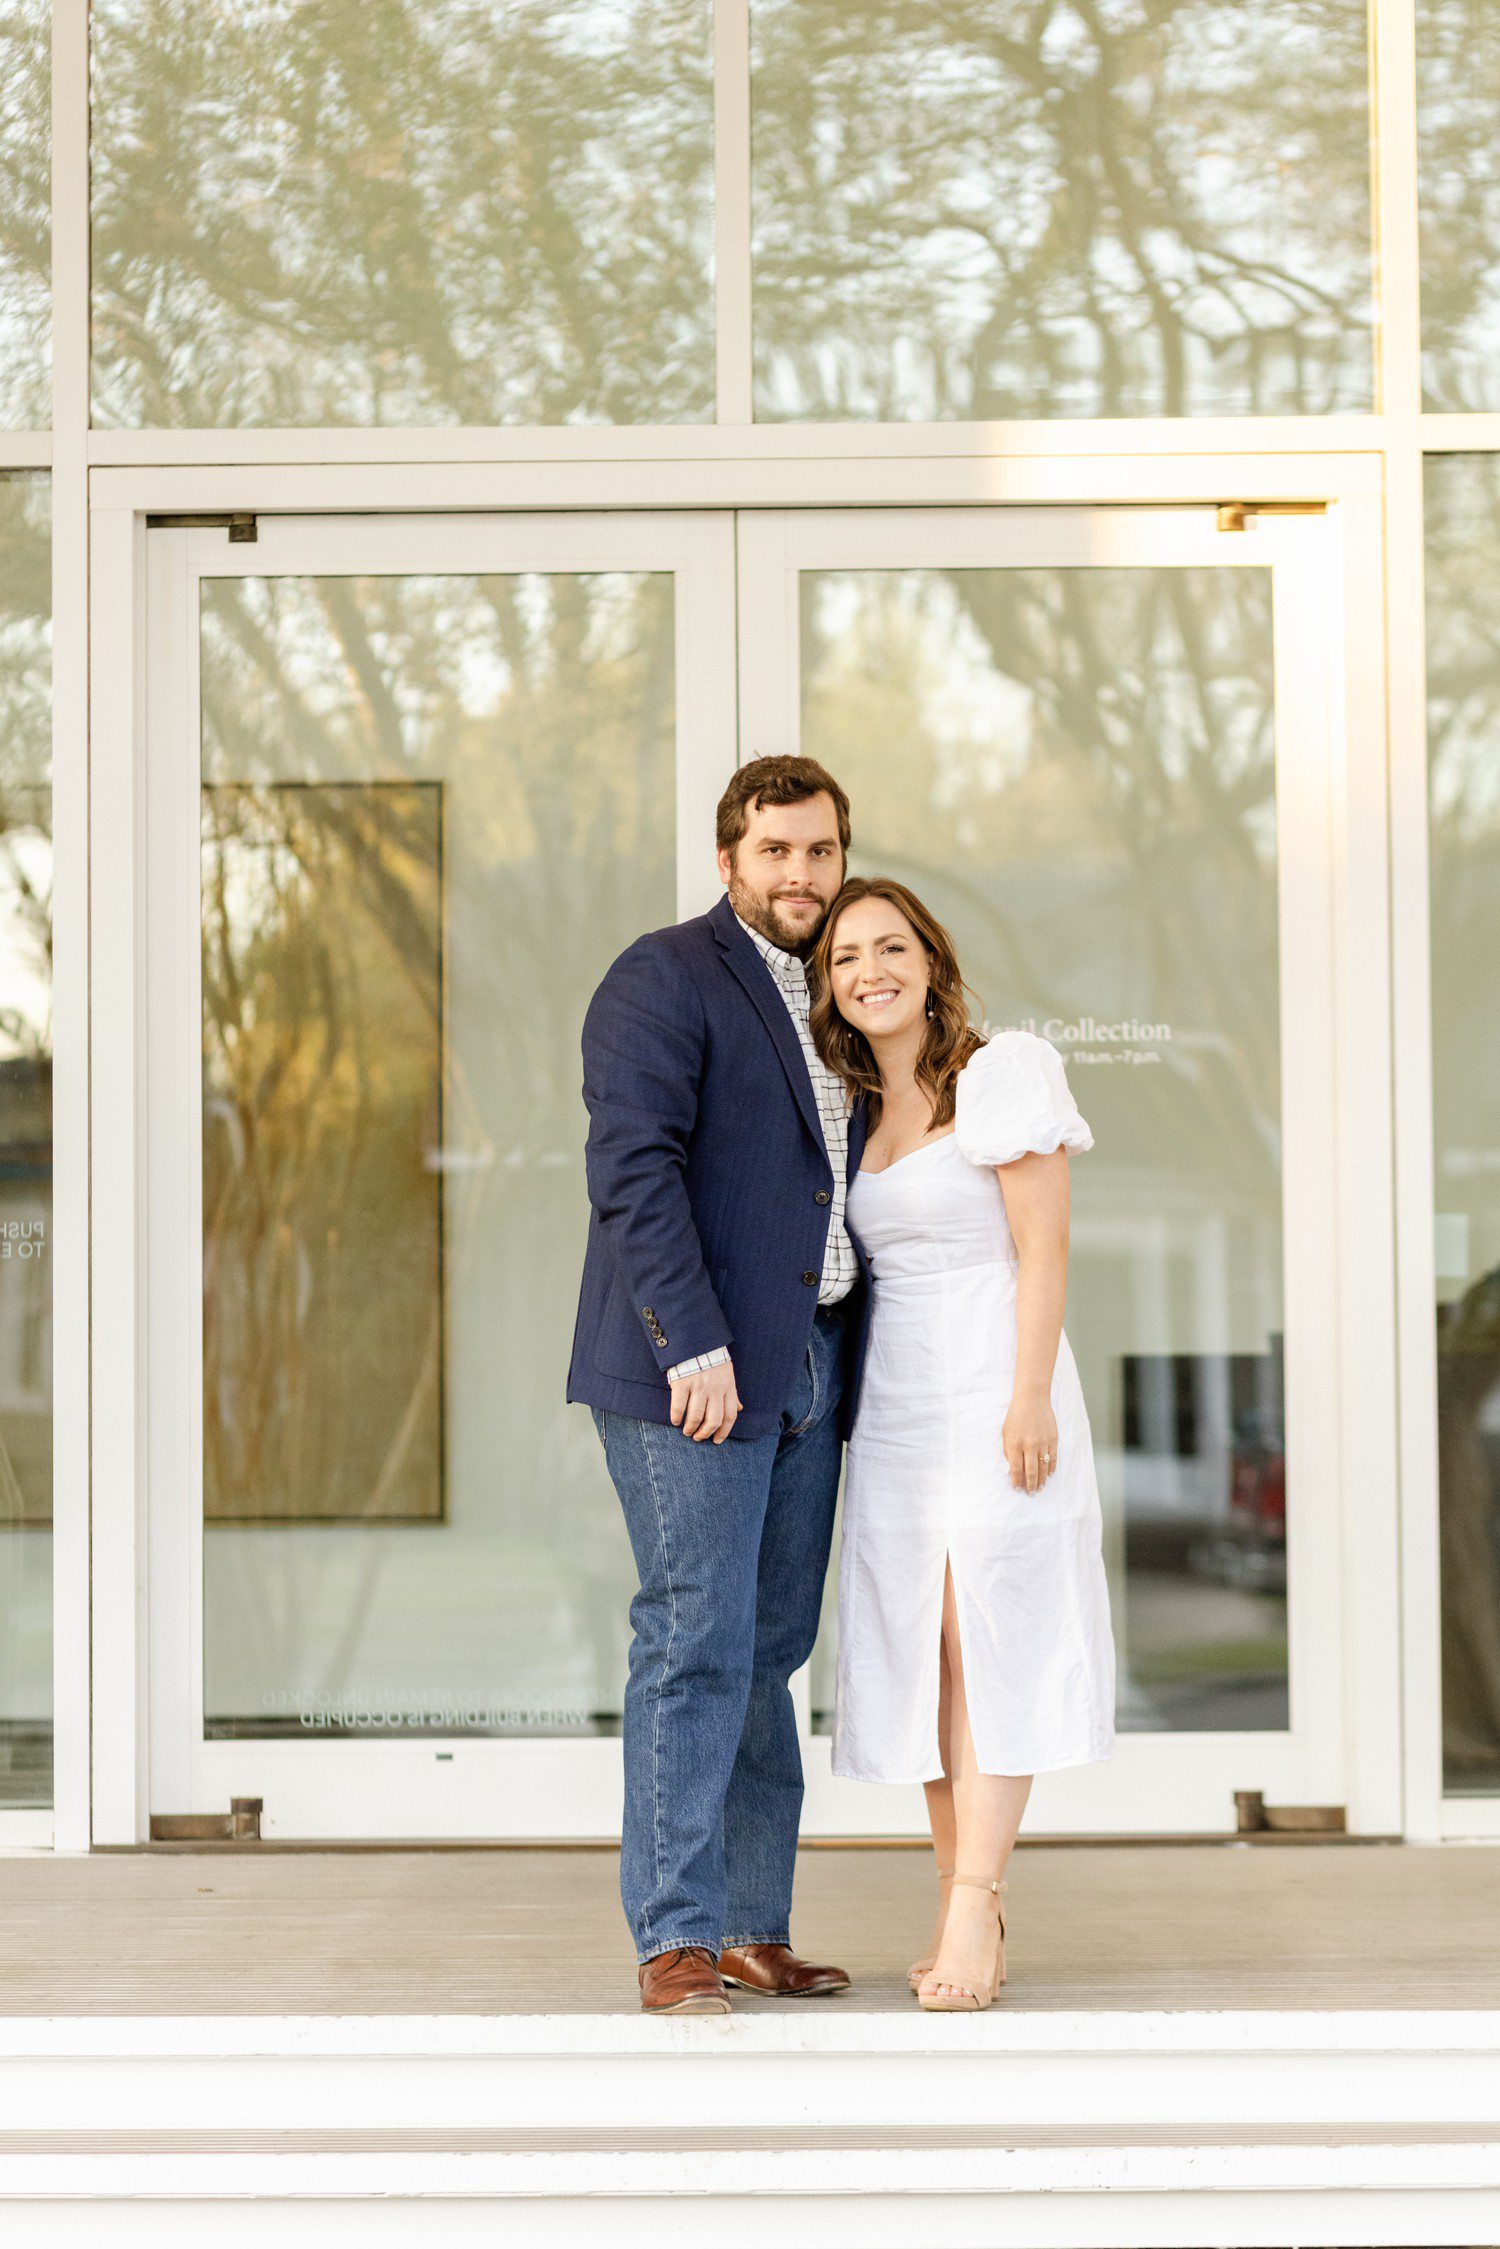 Menil Collection engagement photos in Houston 